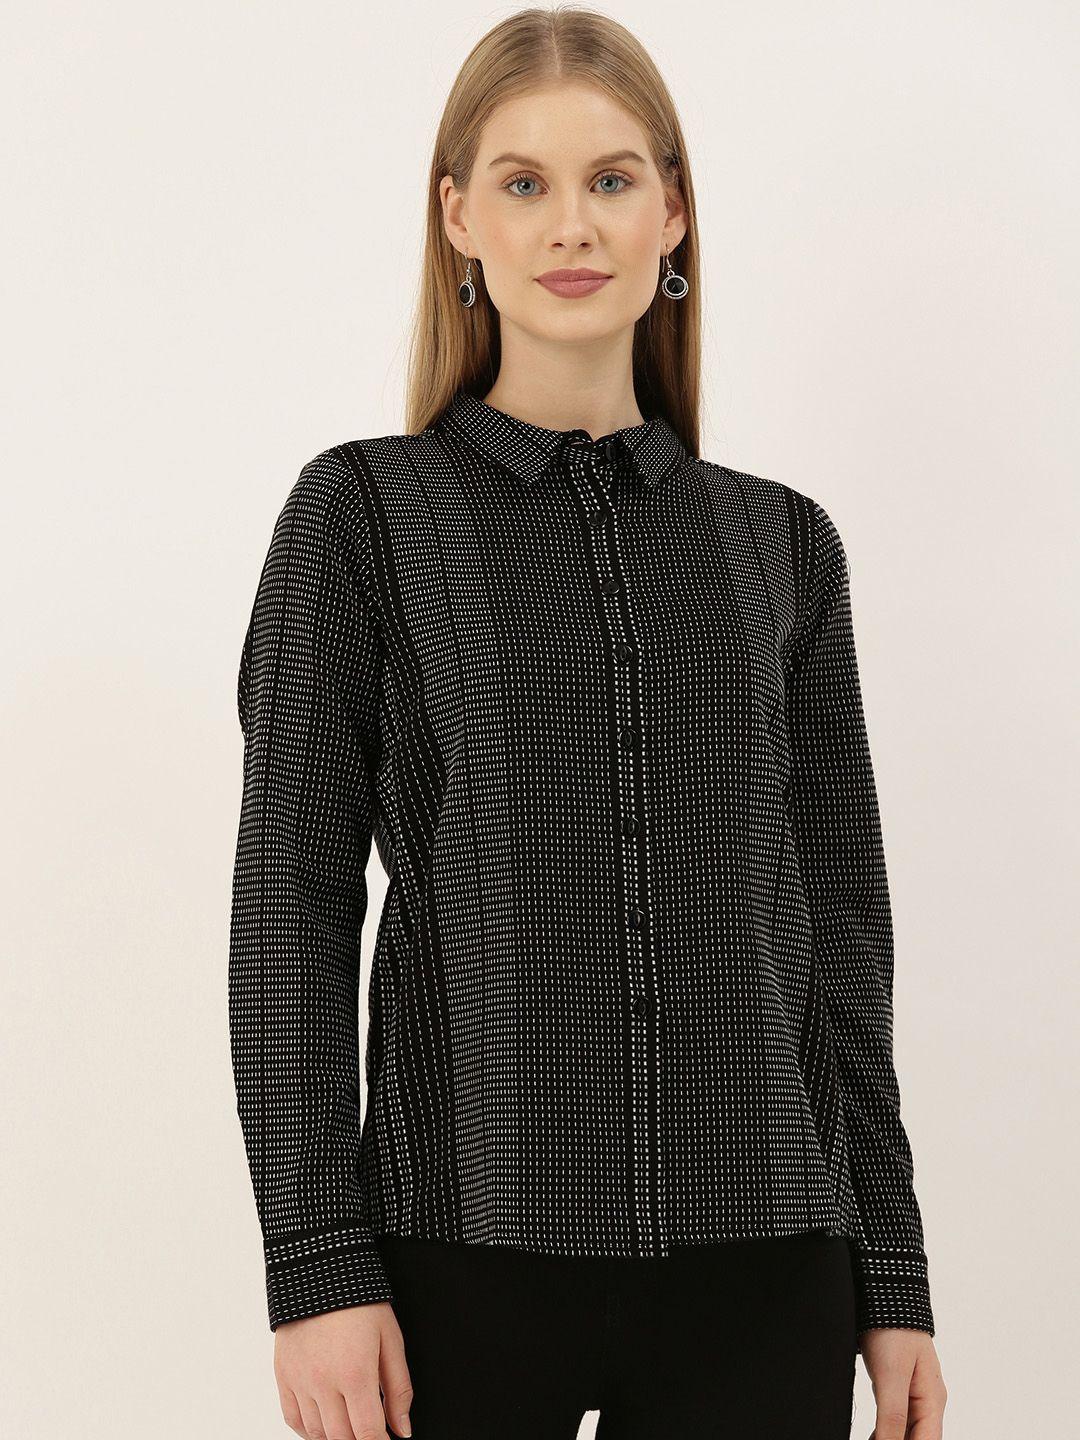 and-women-black-striped-regular-fit-casual-shirt